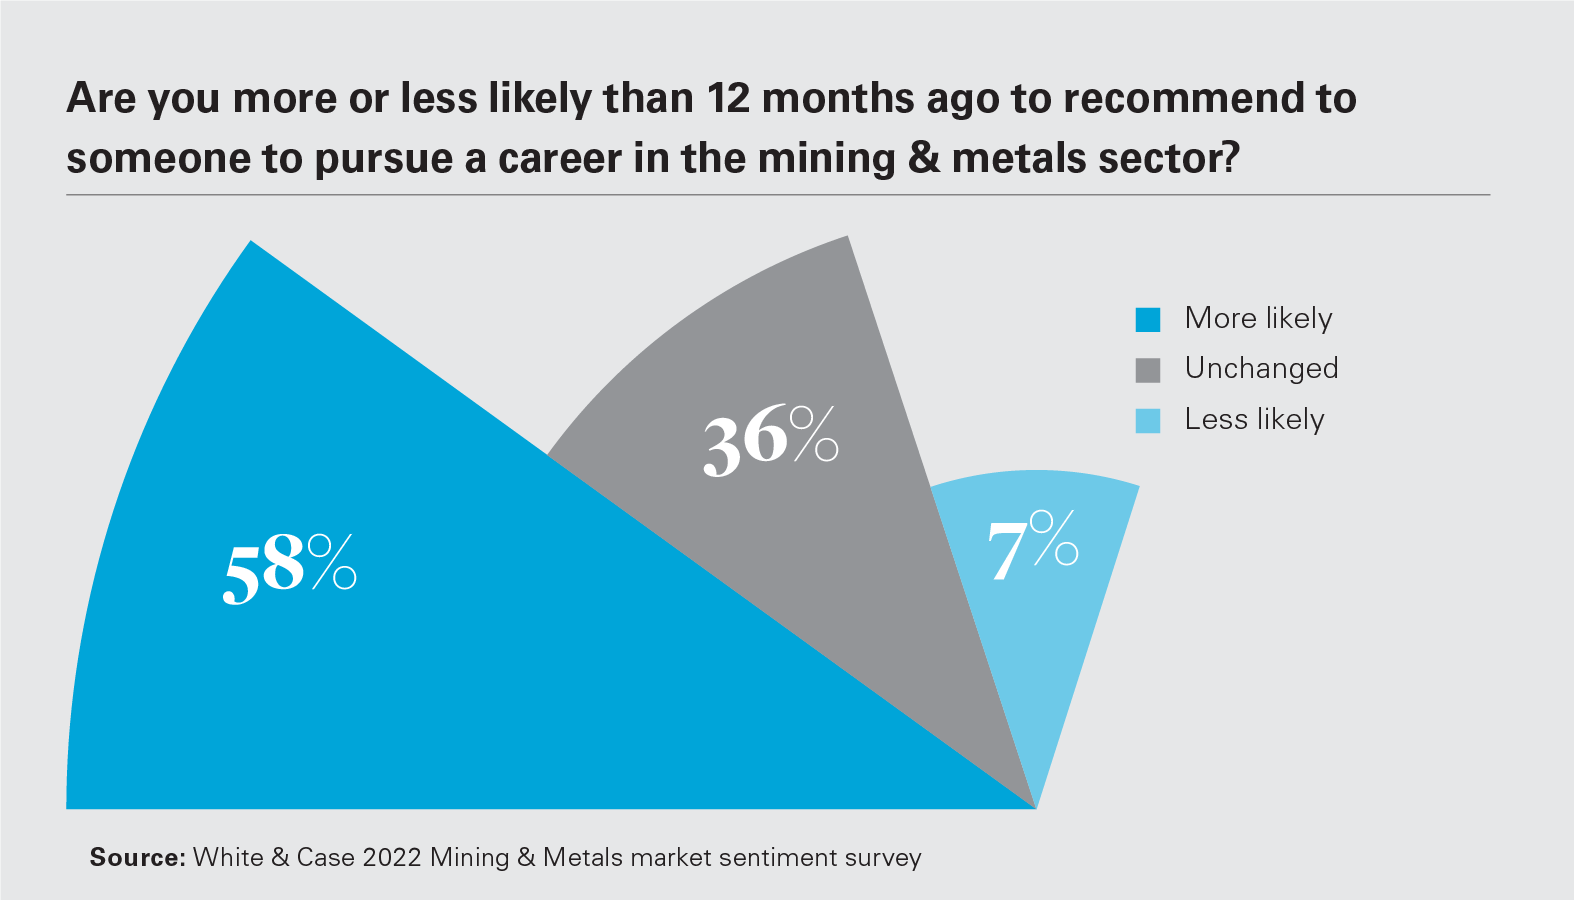 Are you more or less likely than 12 months ago to recommend to someone to pursue a career in the mining & metals sector?